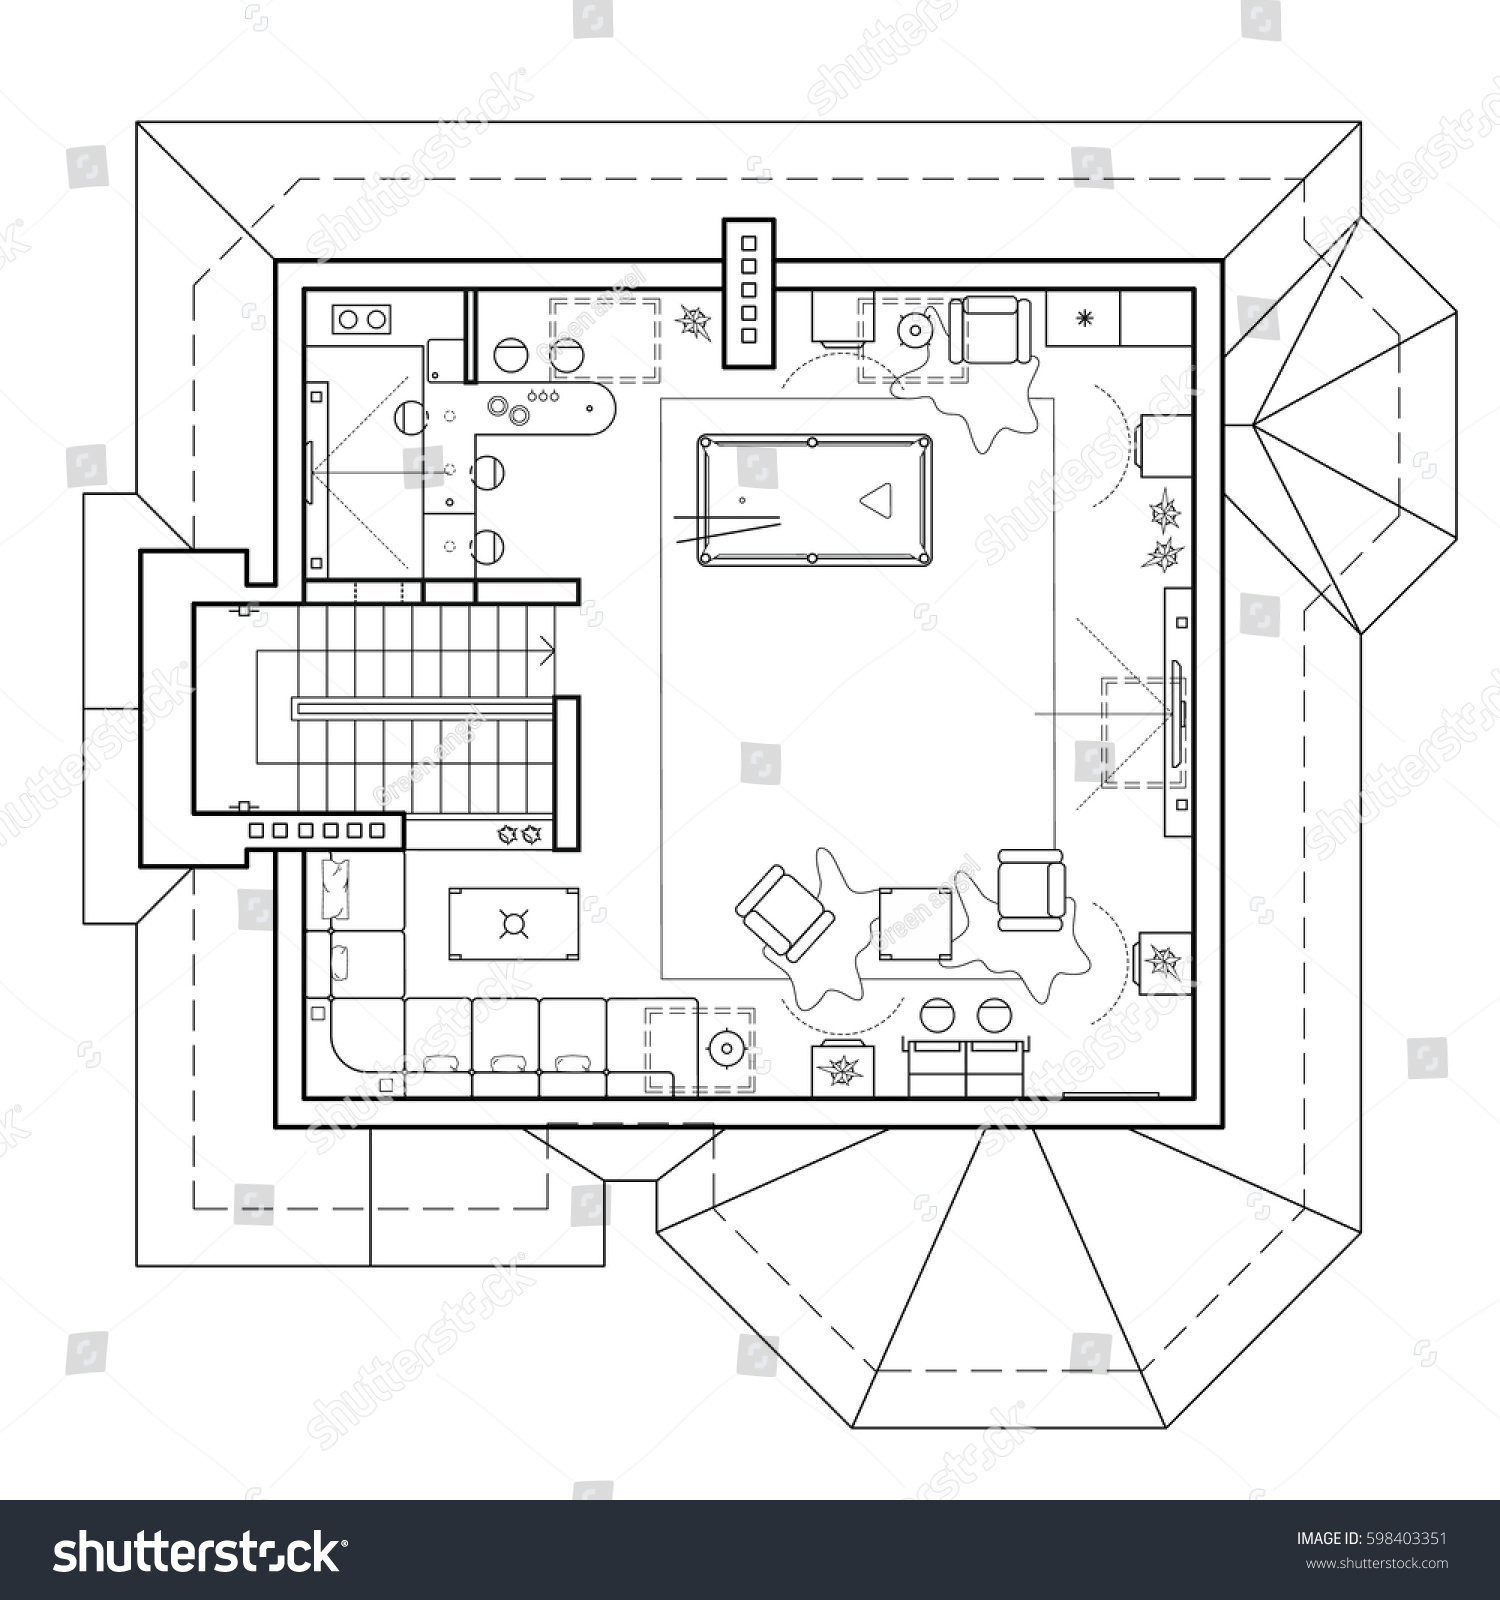 Black White Architectural Plan House Layout Stock Vector 598403351